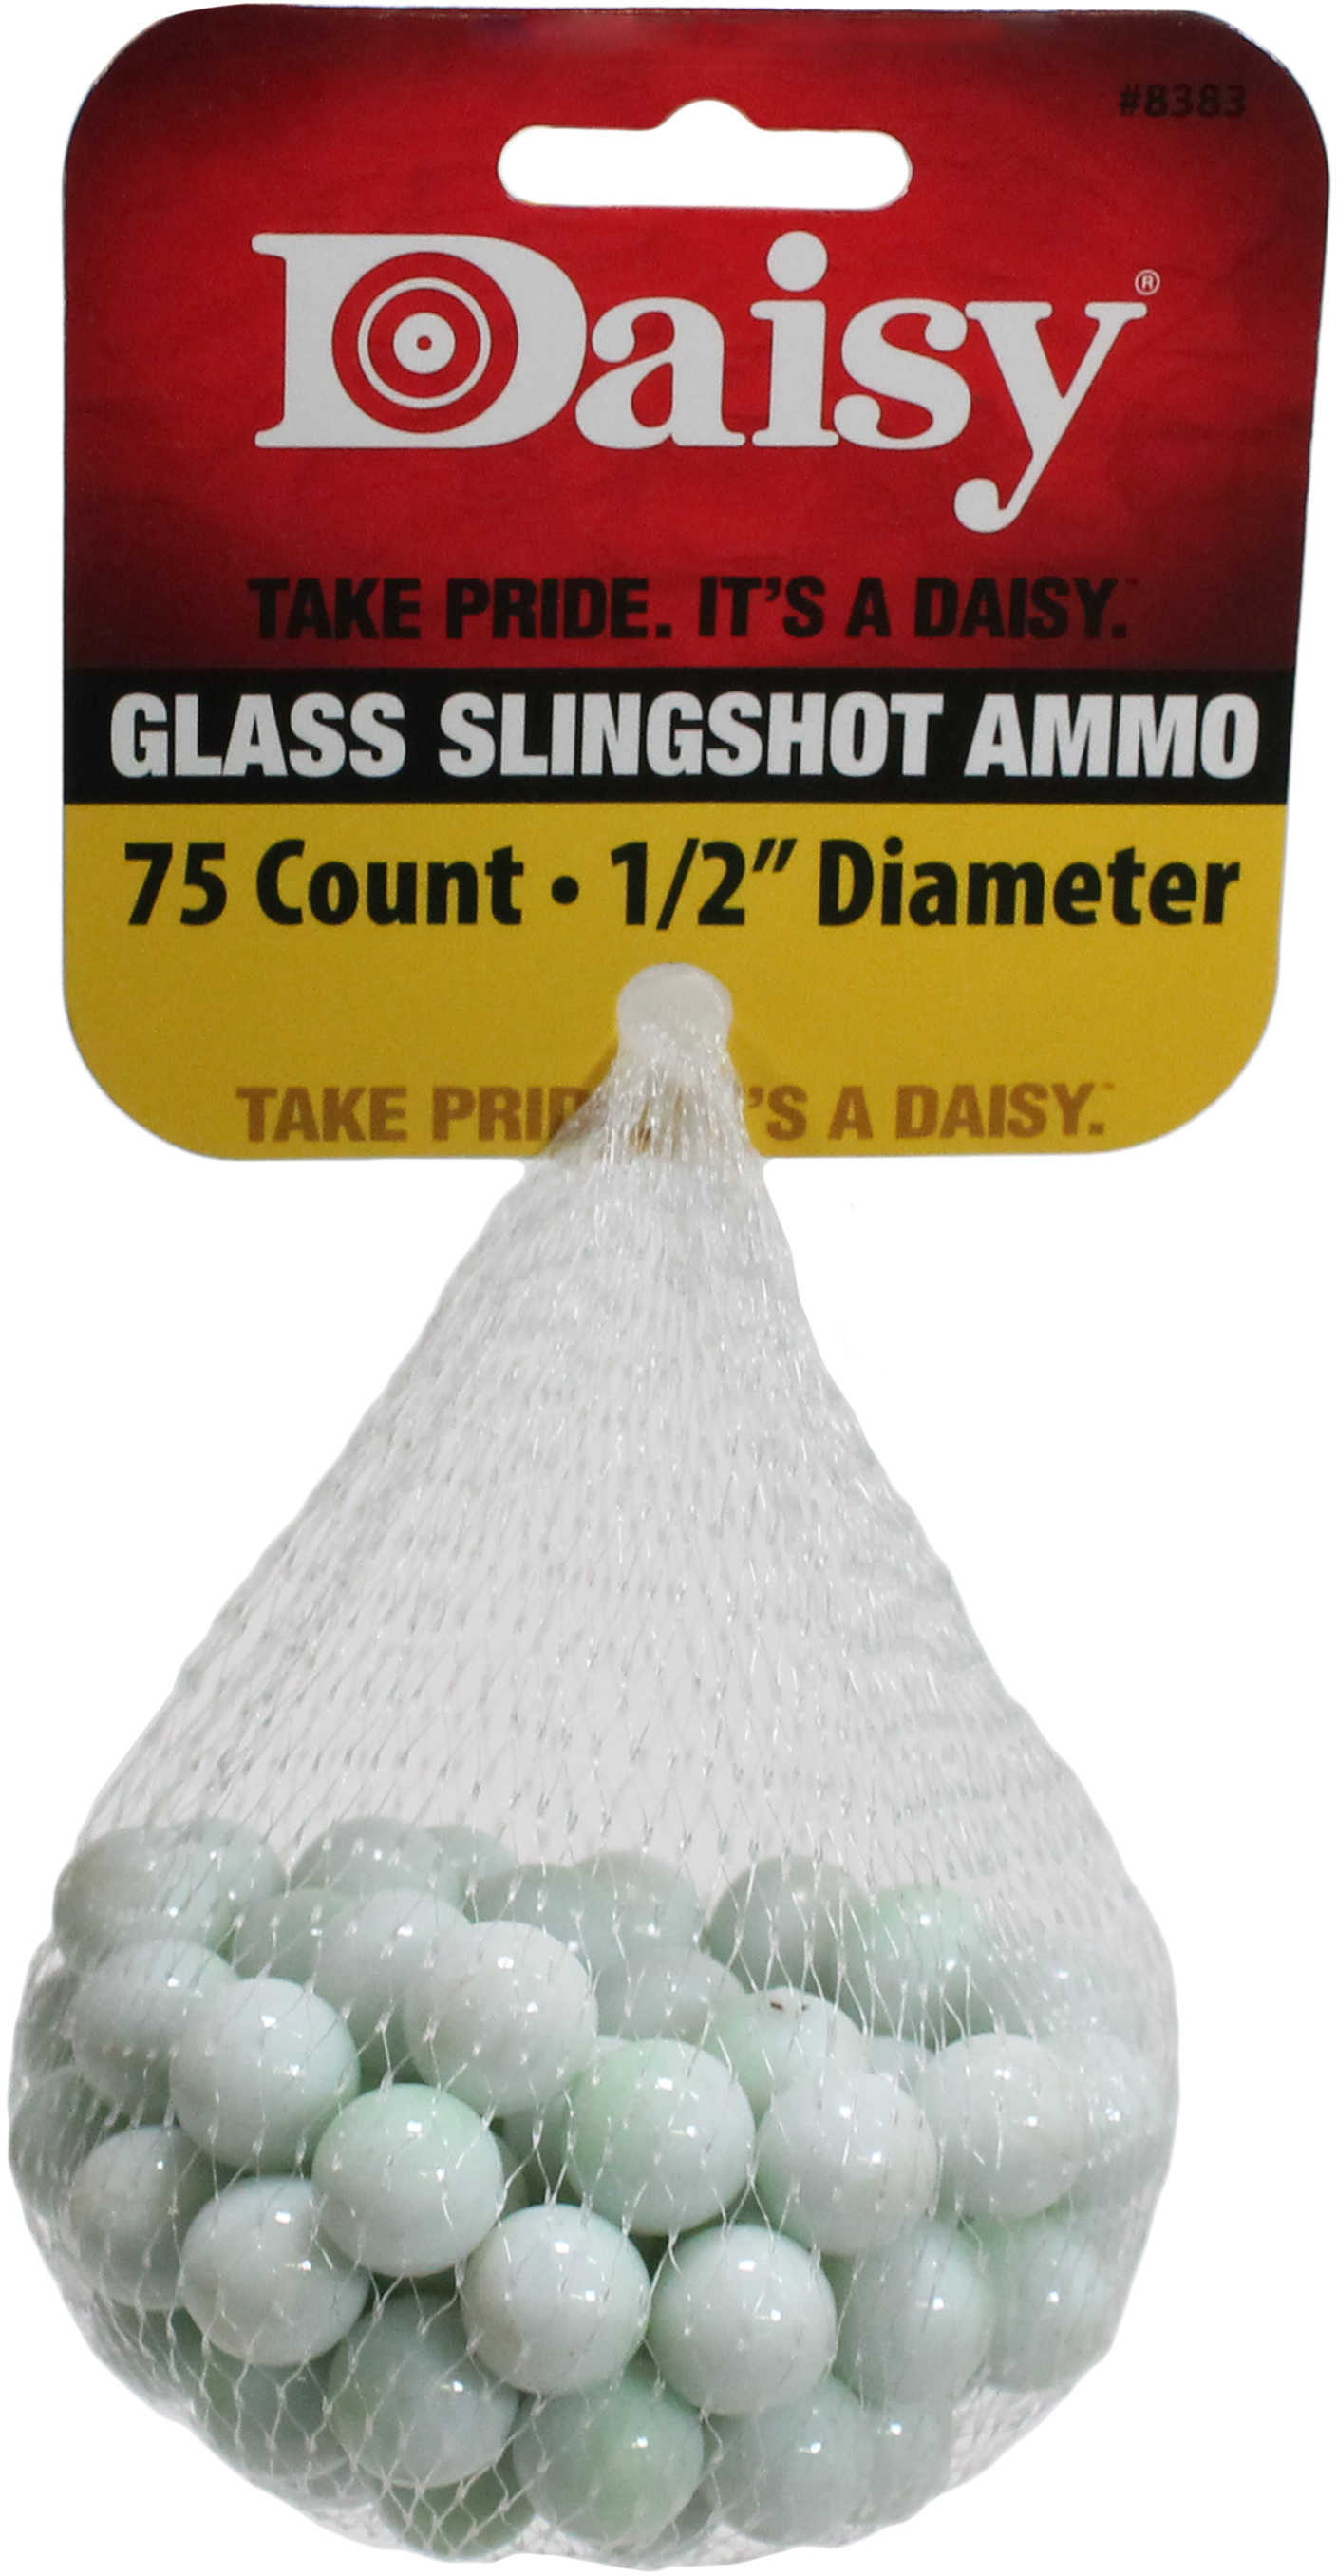 Daisy Outdoor Products Slingshot AMMUNTION 1/2" Glass 75-Count Pack